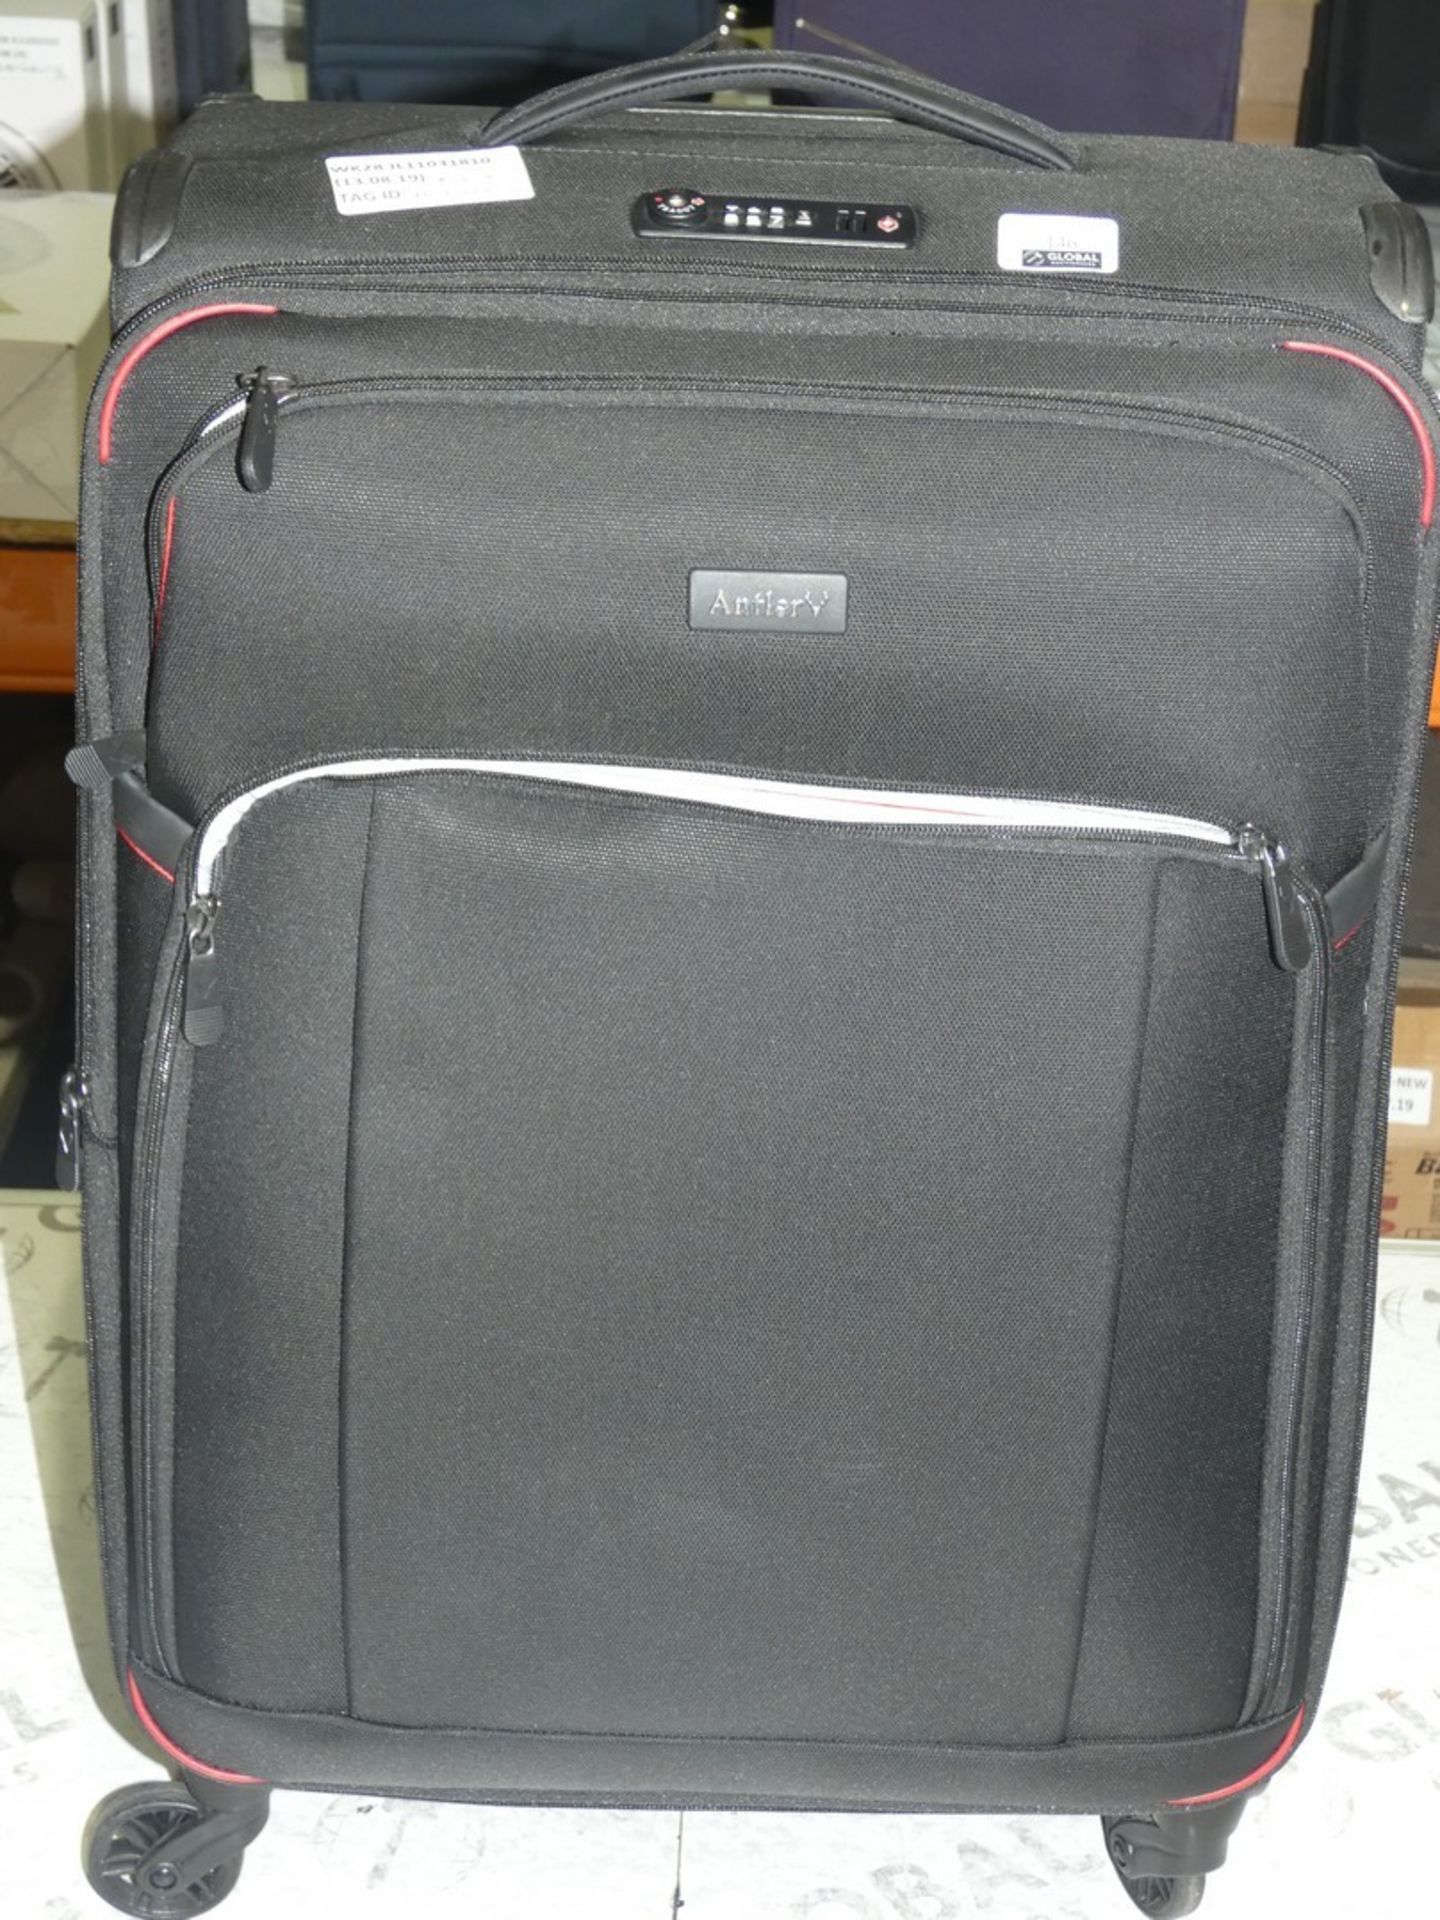 Antler 360 Wheel Trolley Luggage Suitcase (In Need of Attention) RRP £180 (RET00166803) (Viewing/